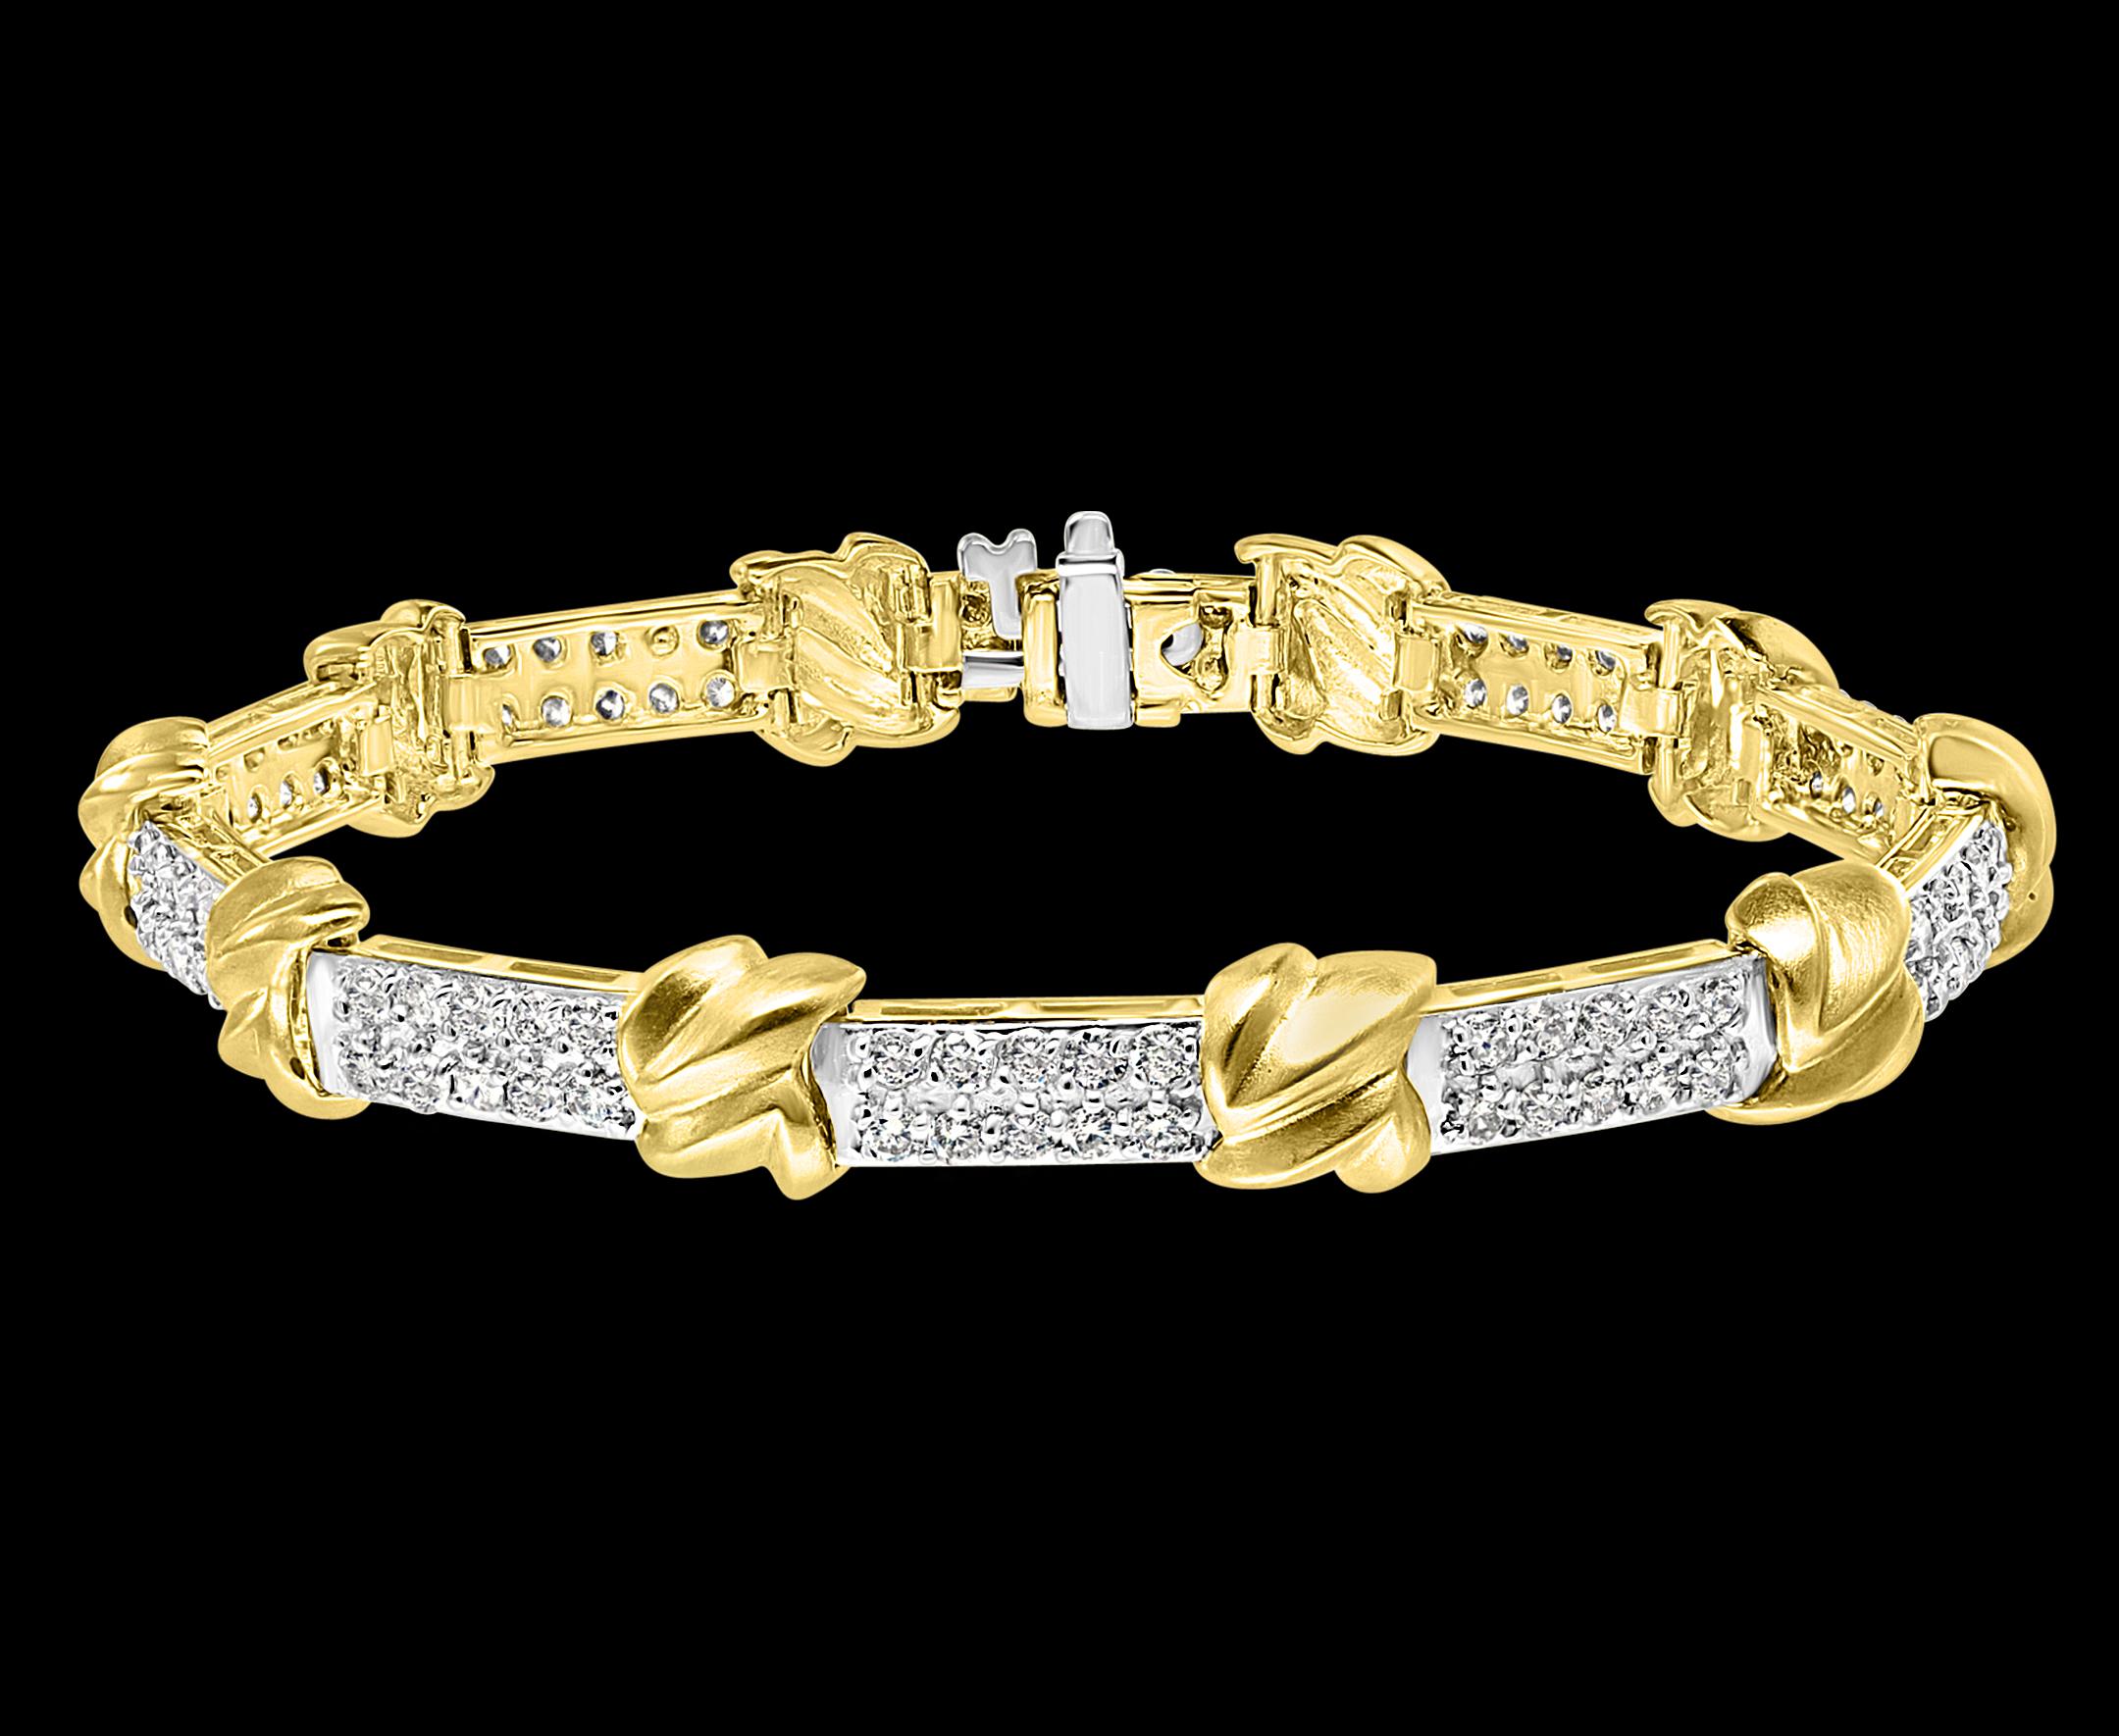 A statement of true, classic elegance, this 14 karat two tone Gold  Bracelet with Pave Diamond  from signature collection. The interlocking gold links, in between diamonds   provide flexibility with a fabric-like movement. This makes for a very